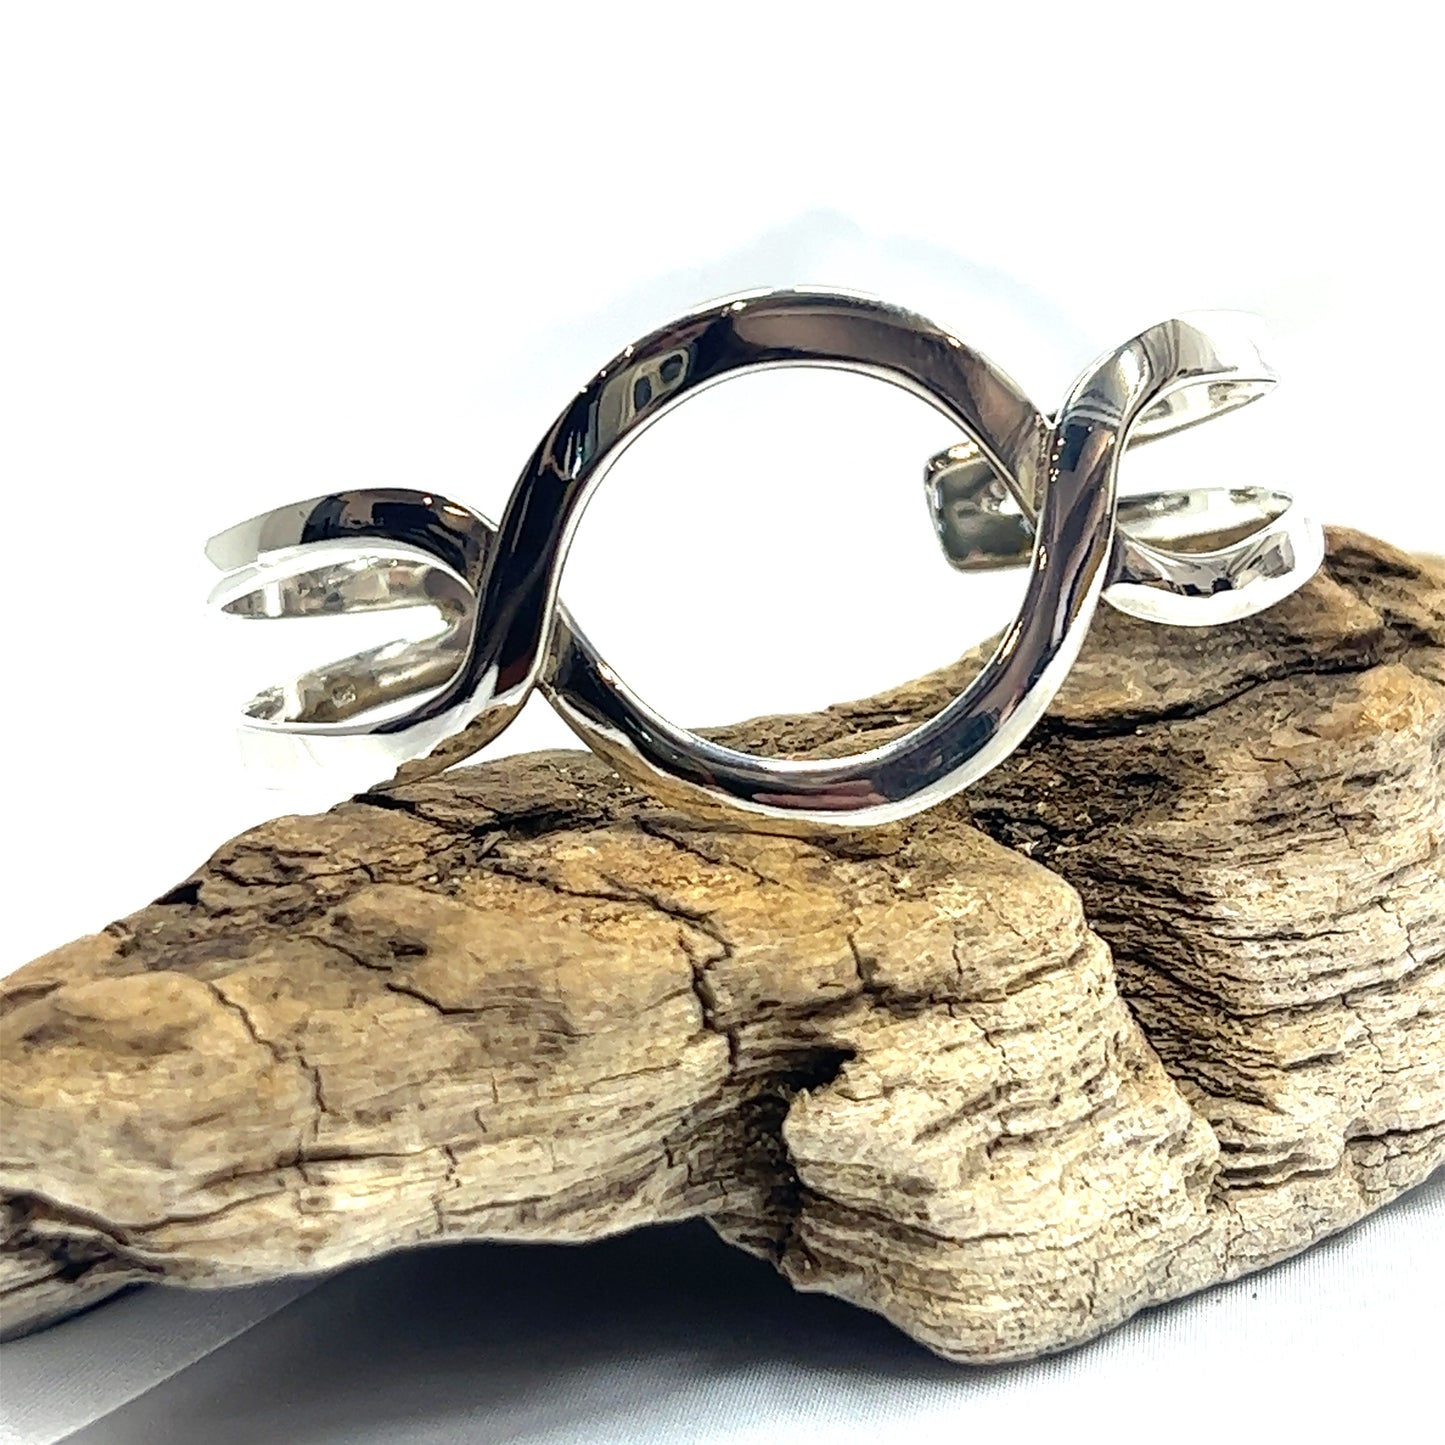 A Trendy Twisted Cuff with Circle Design bracelet from Super Silver, adding a touch of boho chic, resting on a piece of wood.